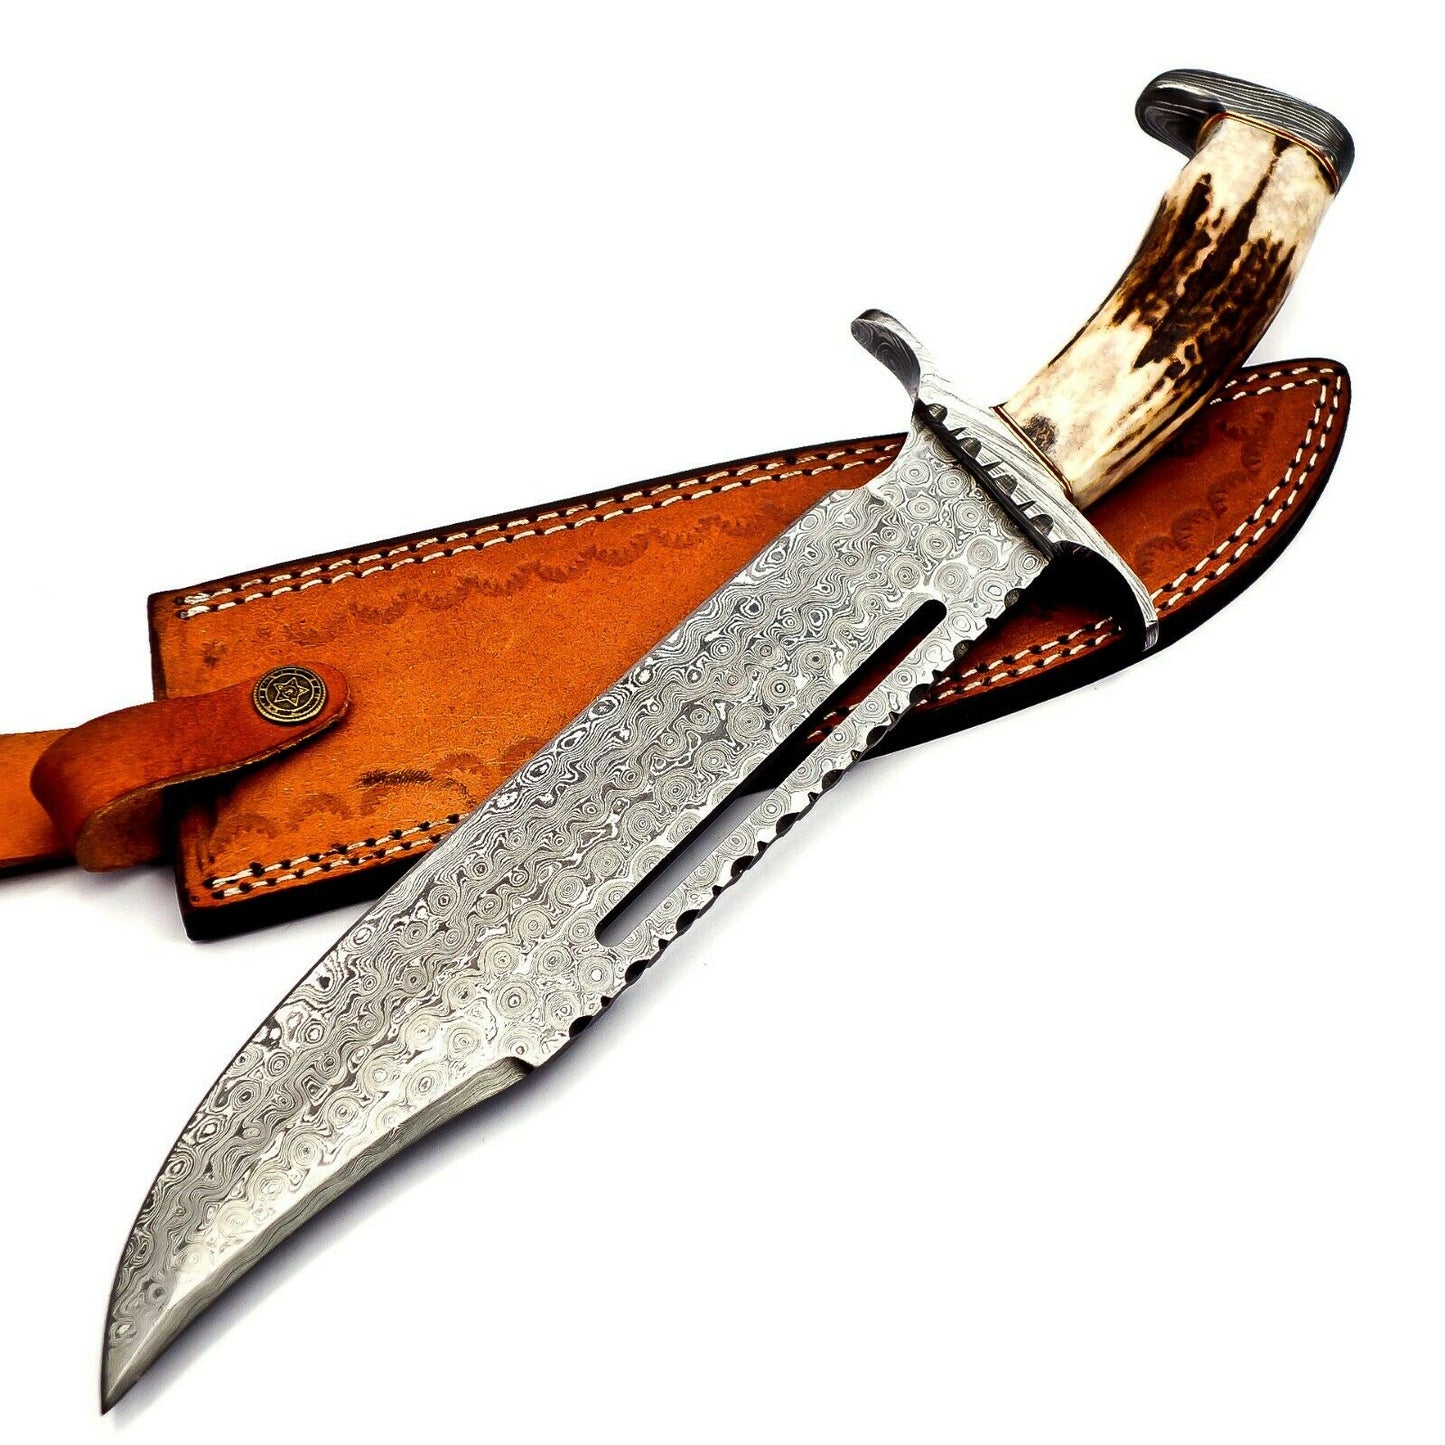 Handmade Damascus Steel Hunting Bowie Knife Stag Handle With Leather Sheath